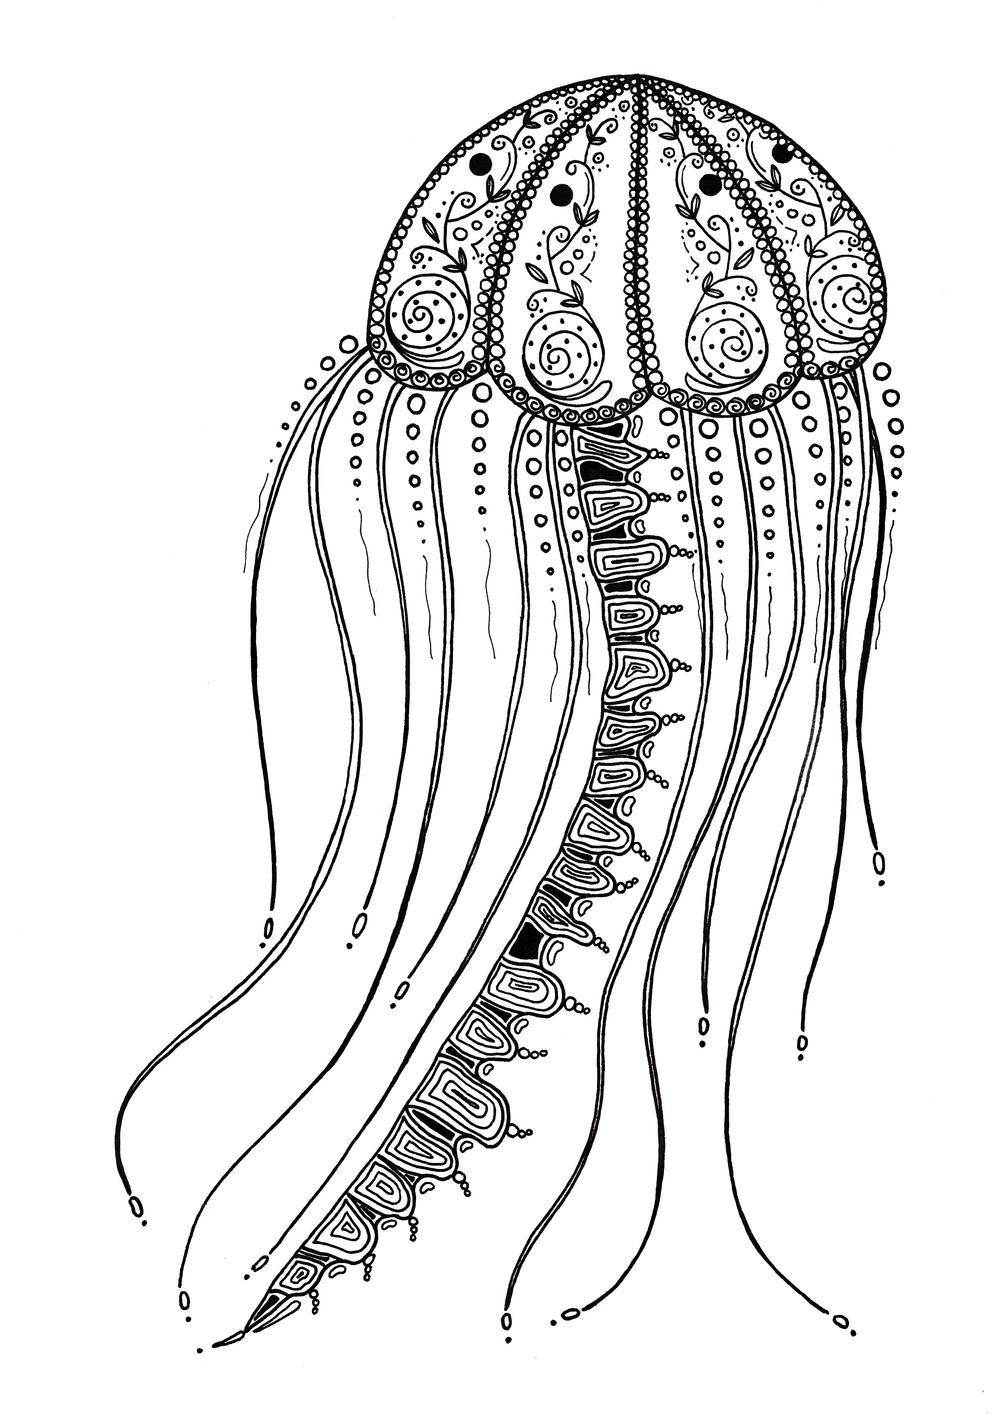 Delicate Jellyfish Adult Coloring Page | FaveCrafts.com